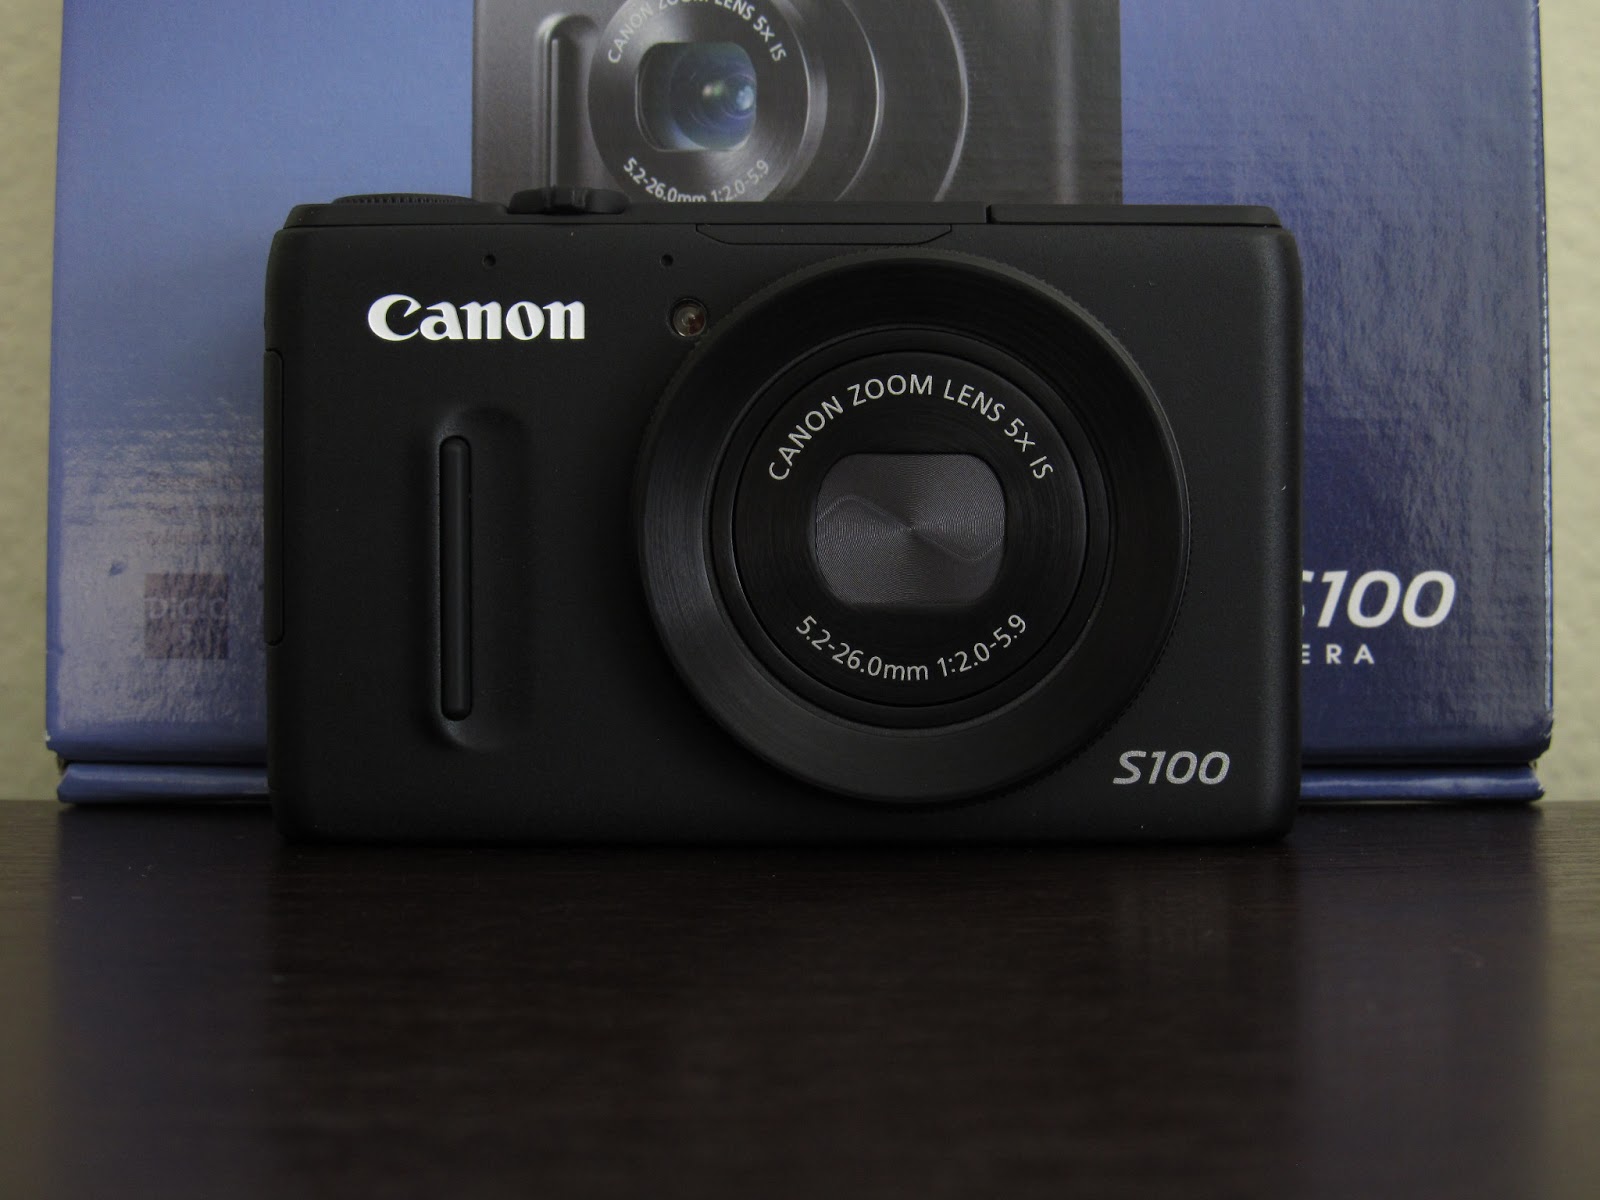 PHOTOGRAPHIC CENTRAL: Canon Powershot SX130IS- Review